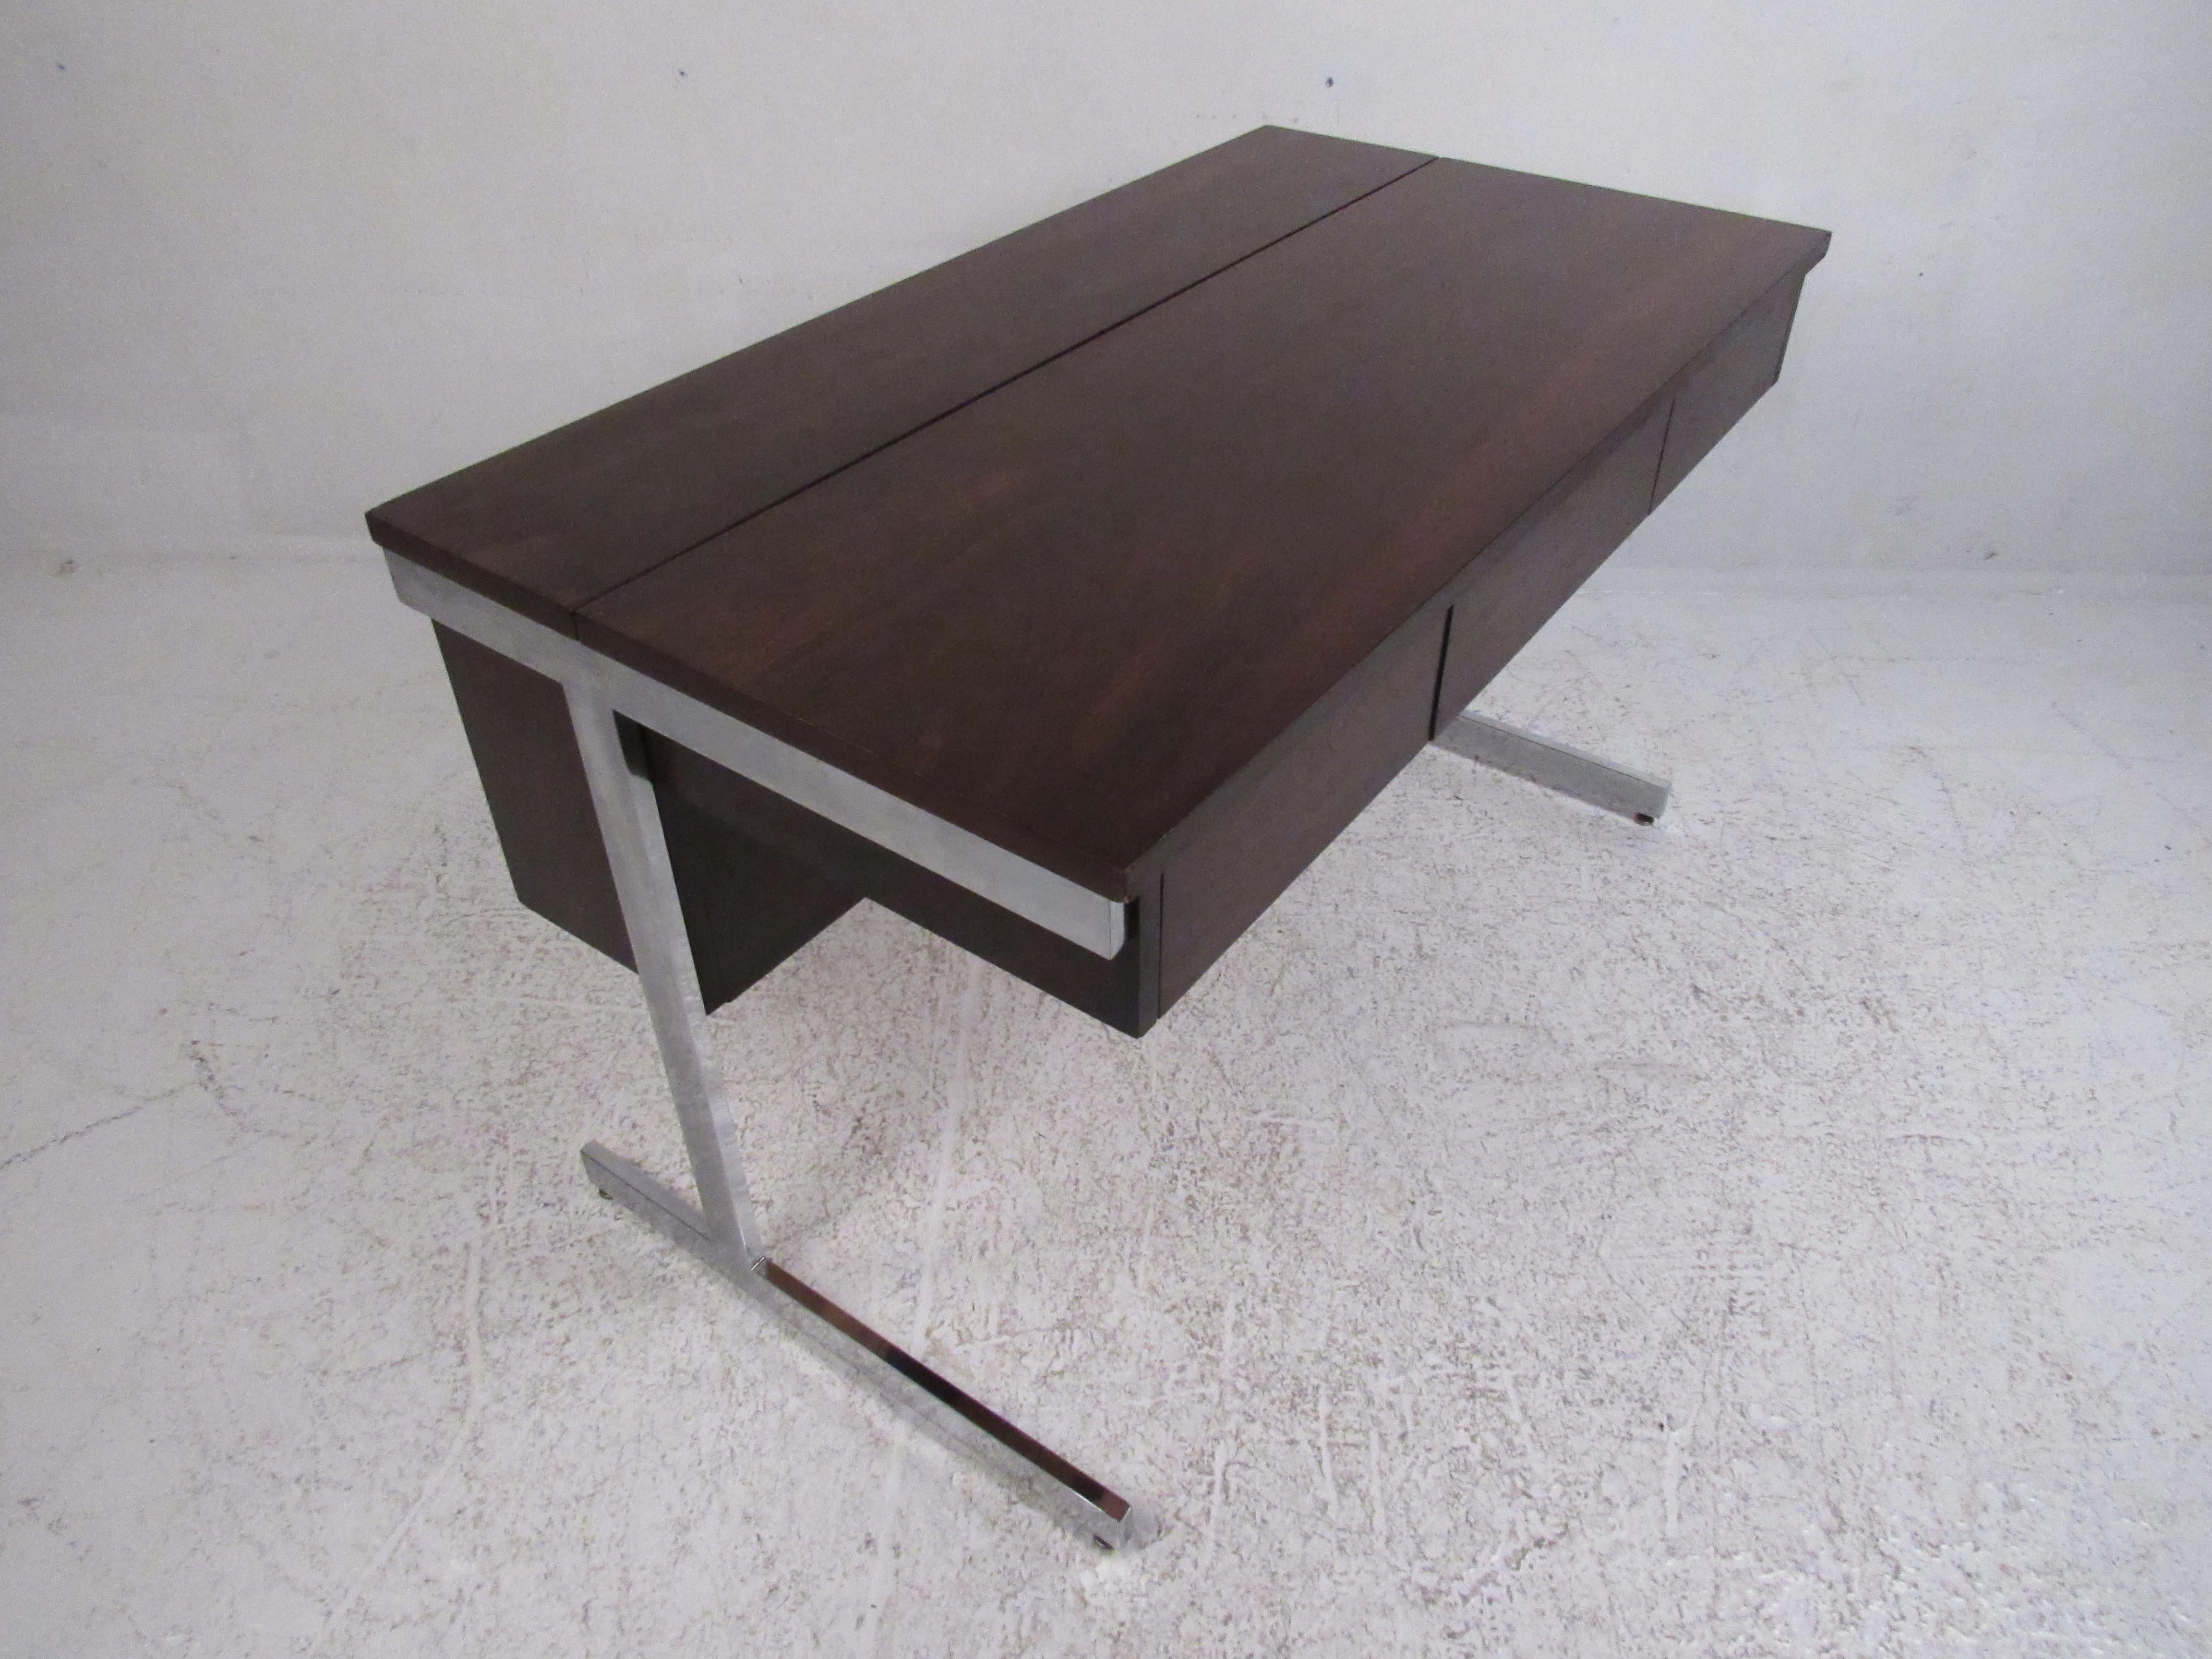 This attractive vintage modern desk features a unique pop-top storage compartment on the top and three large drawers. A one of a kind design with chrome flat bar sled legs and elegant rosewood grain throughout. This well-made case piece has a